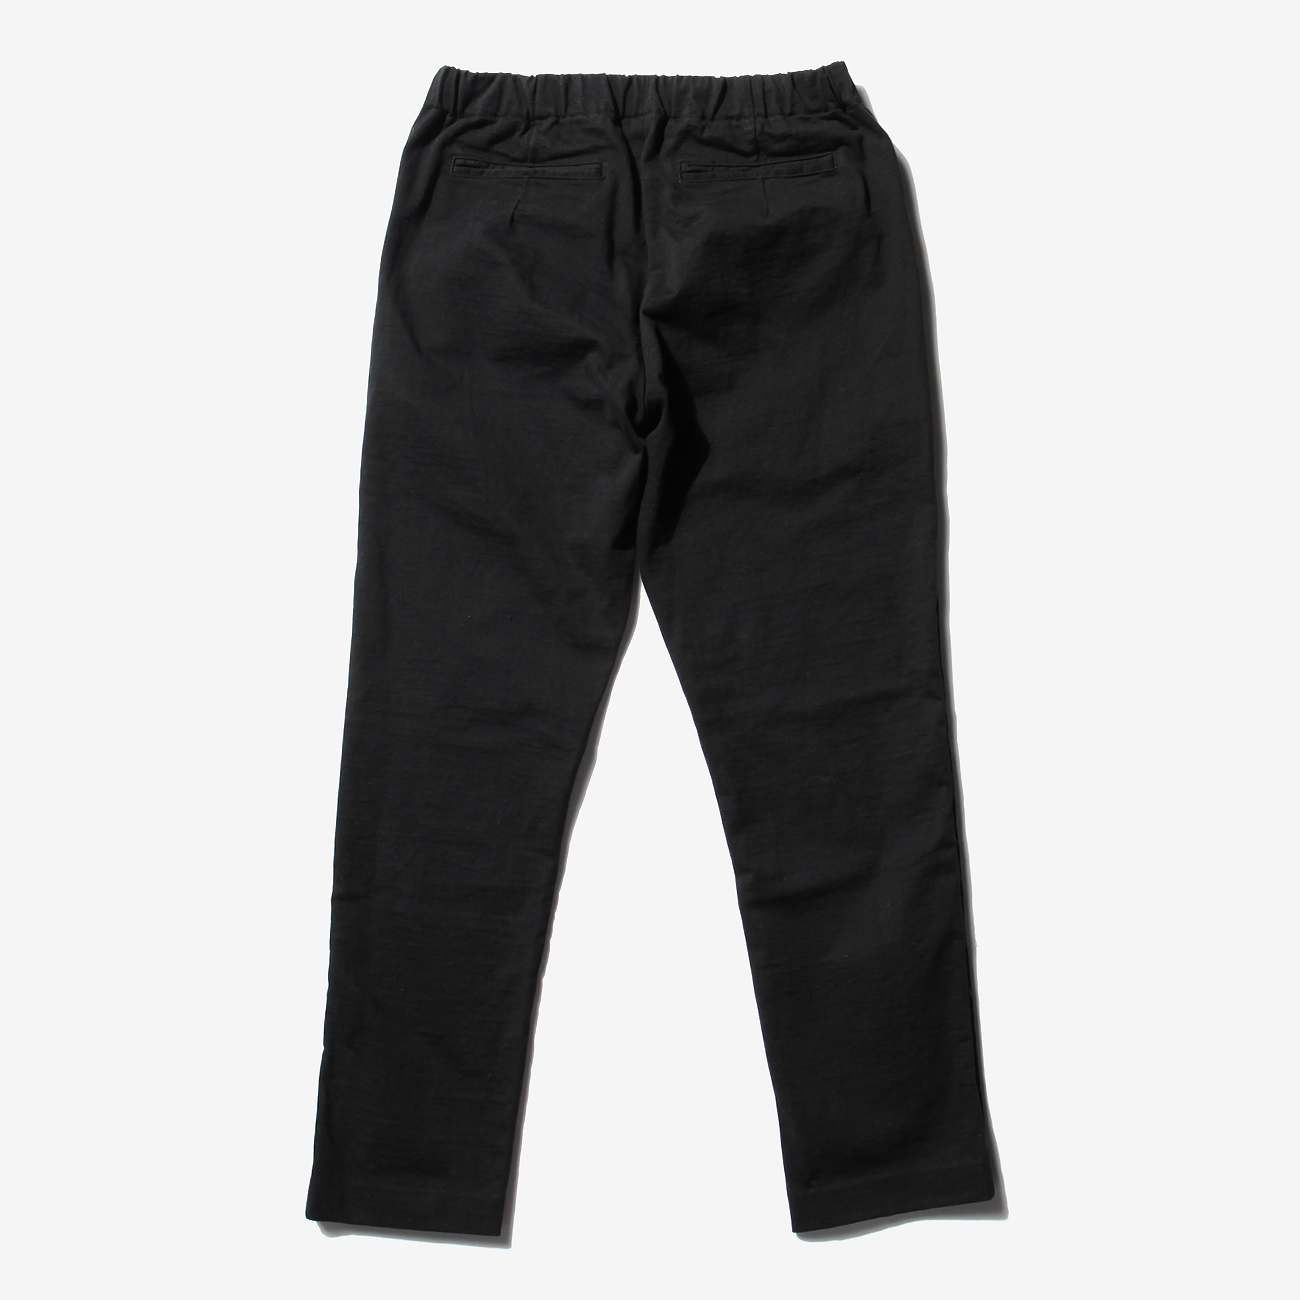 STAND-UP EASY PANTS (メンズ) - Black